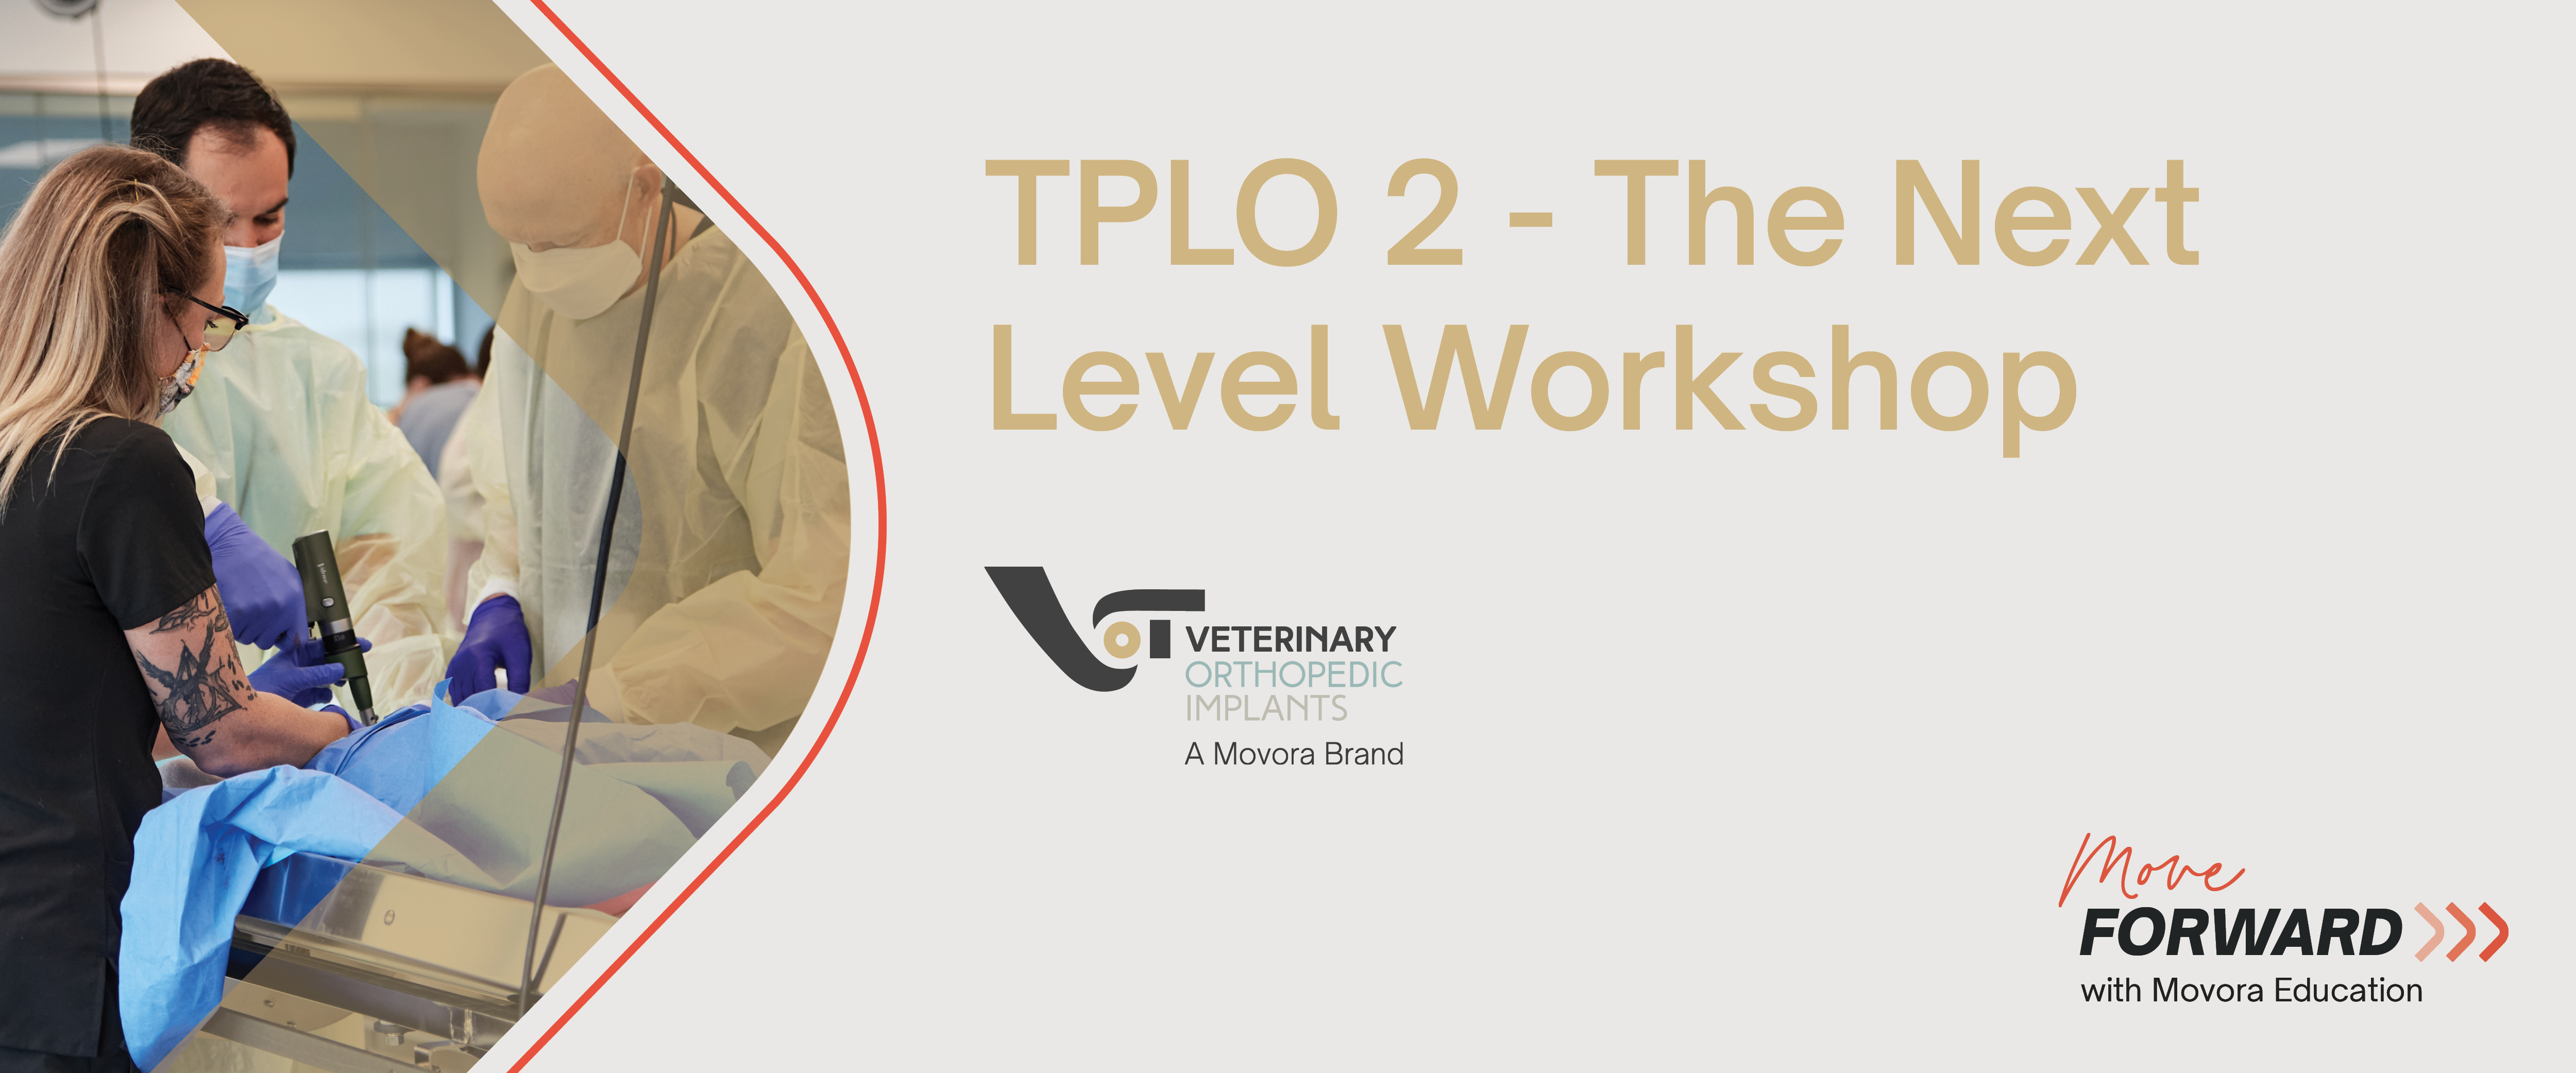 TPLO 2 - The next level workshop